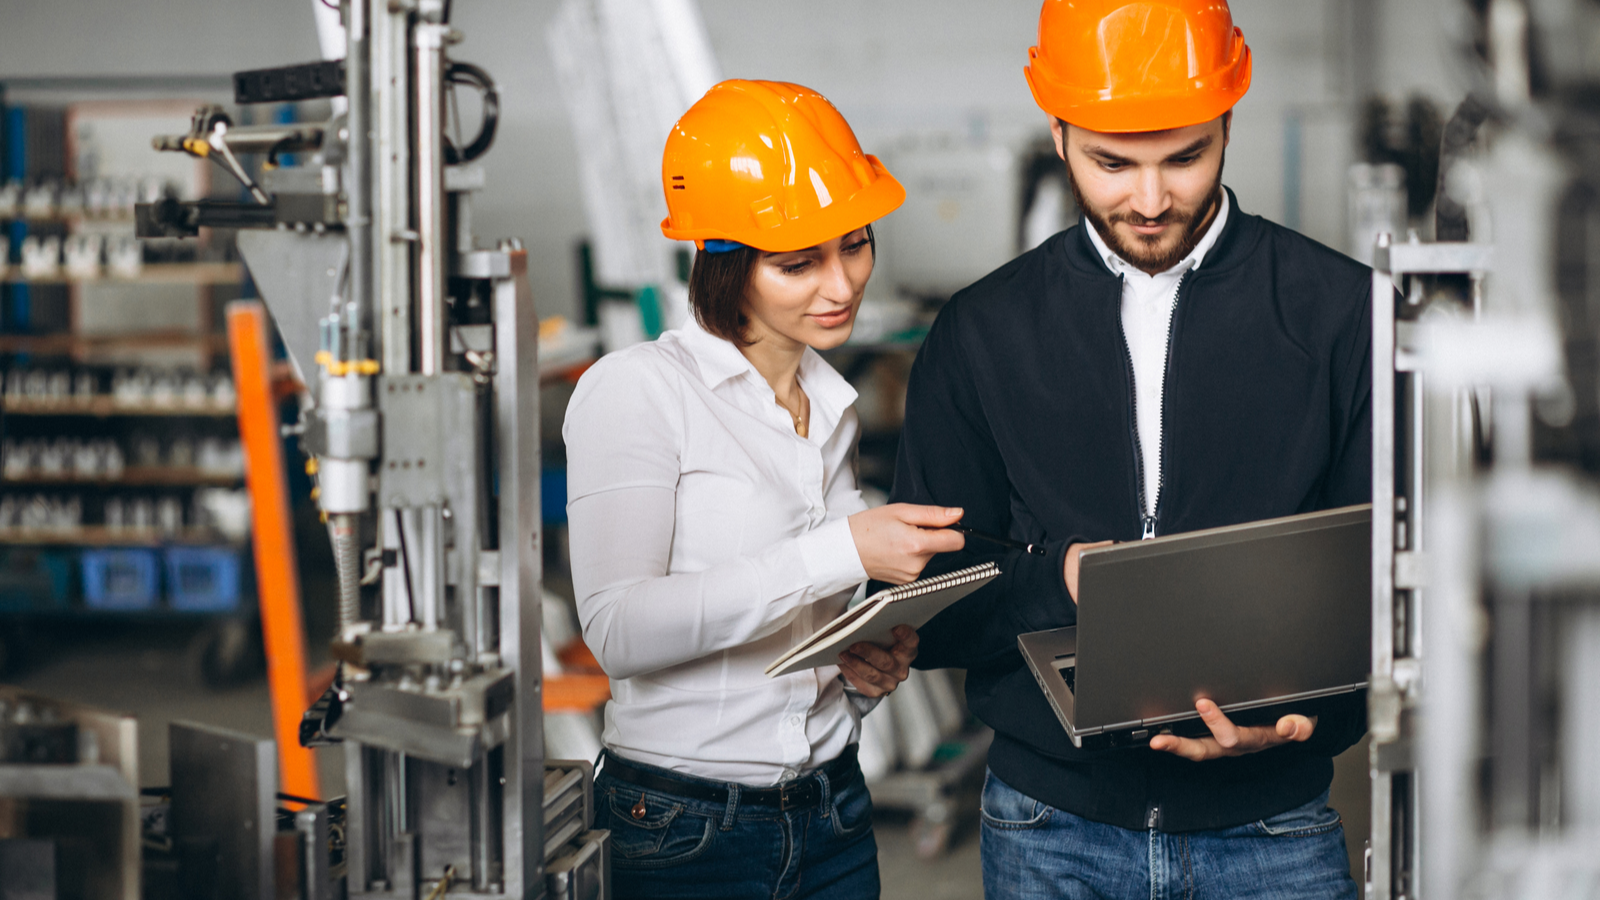 Female and male maintanence workers discussing CMMS software on laptop